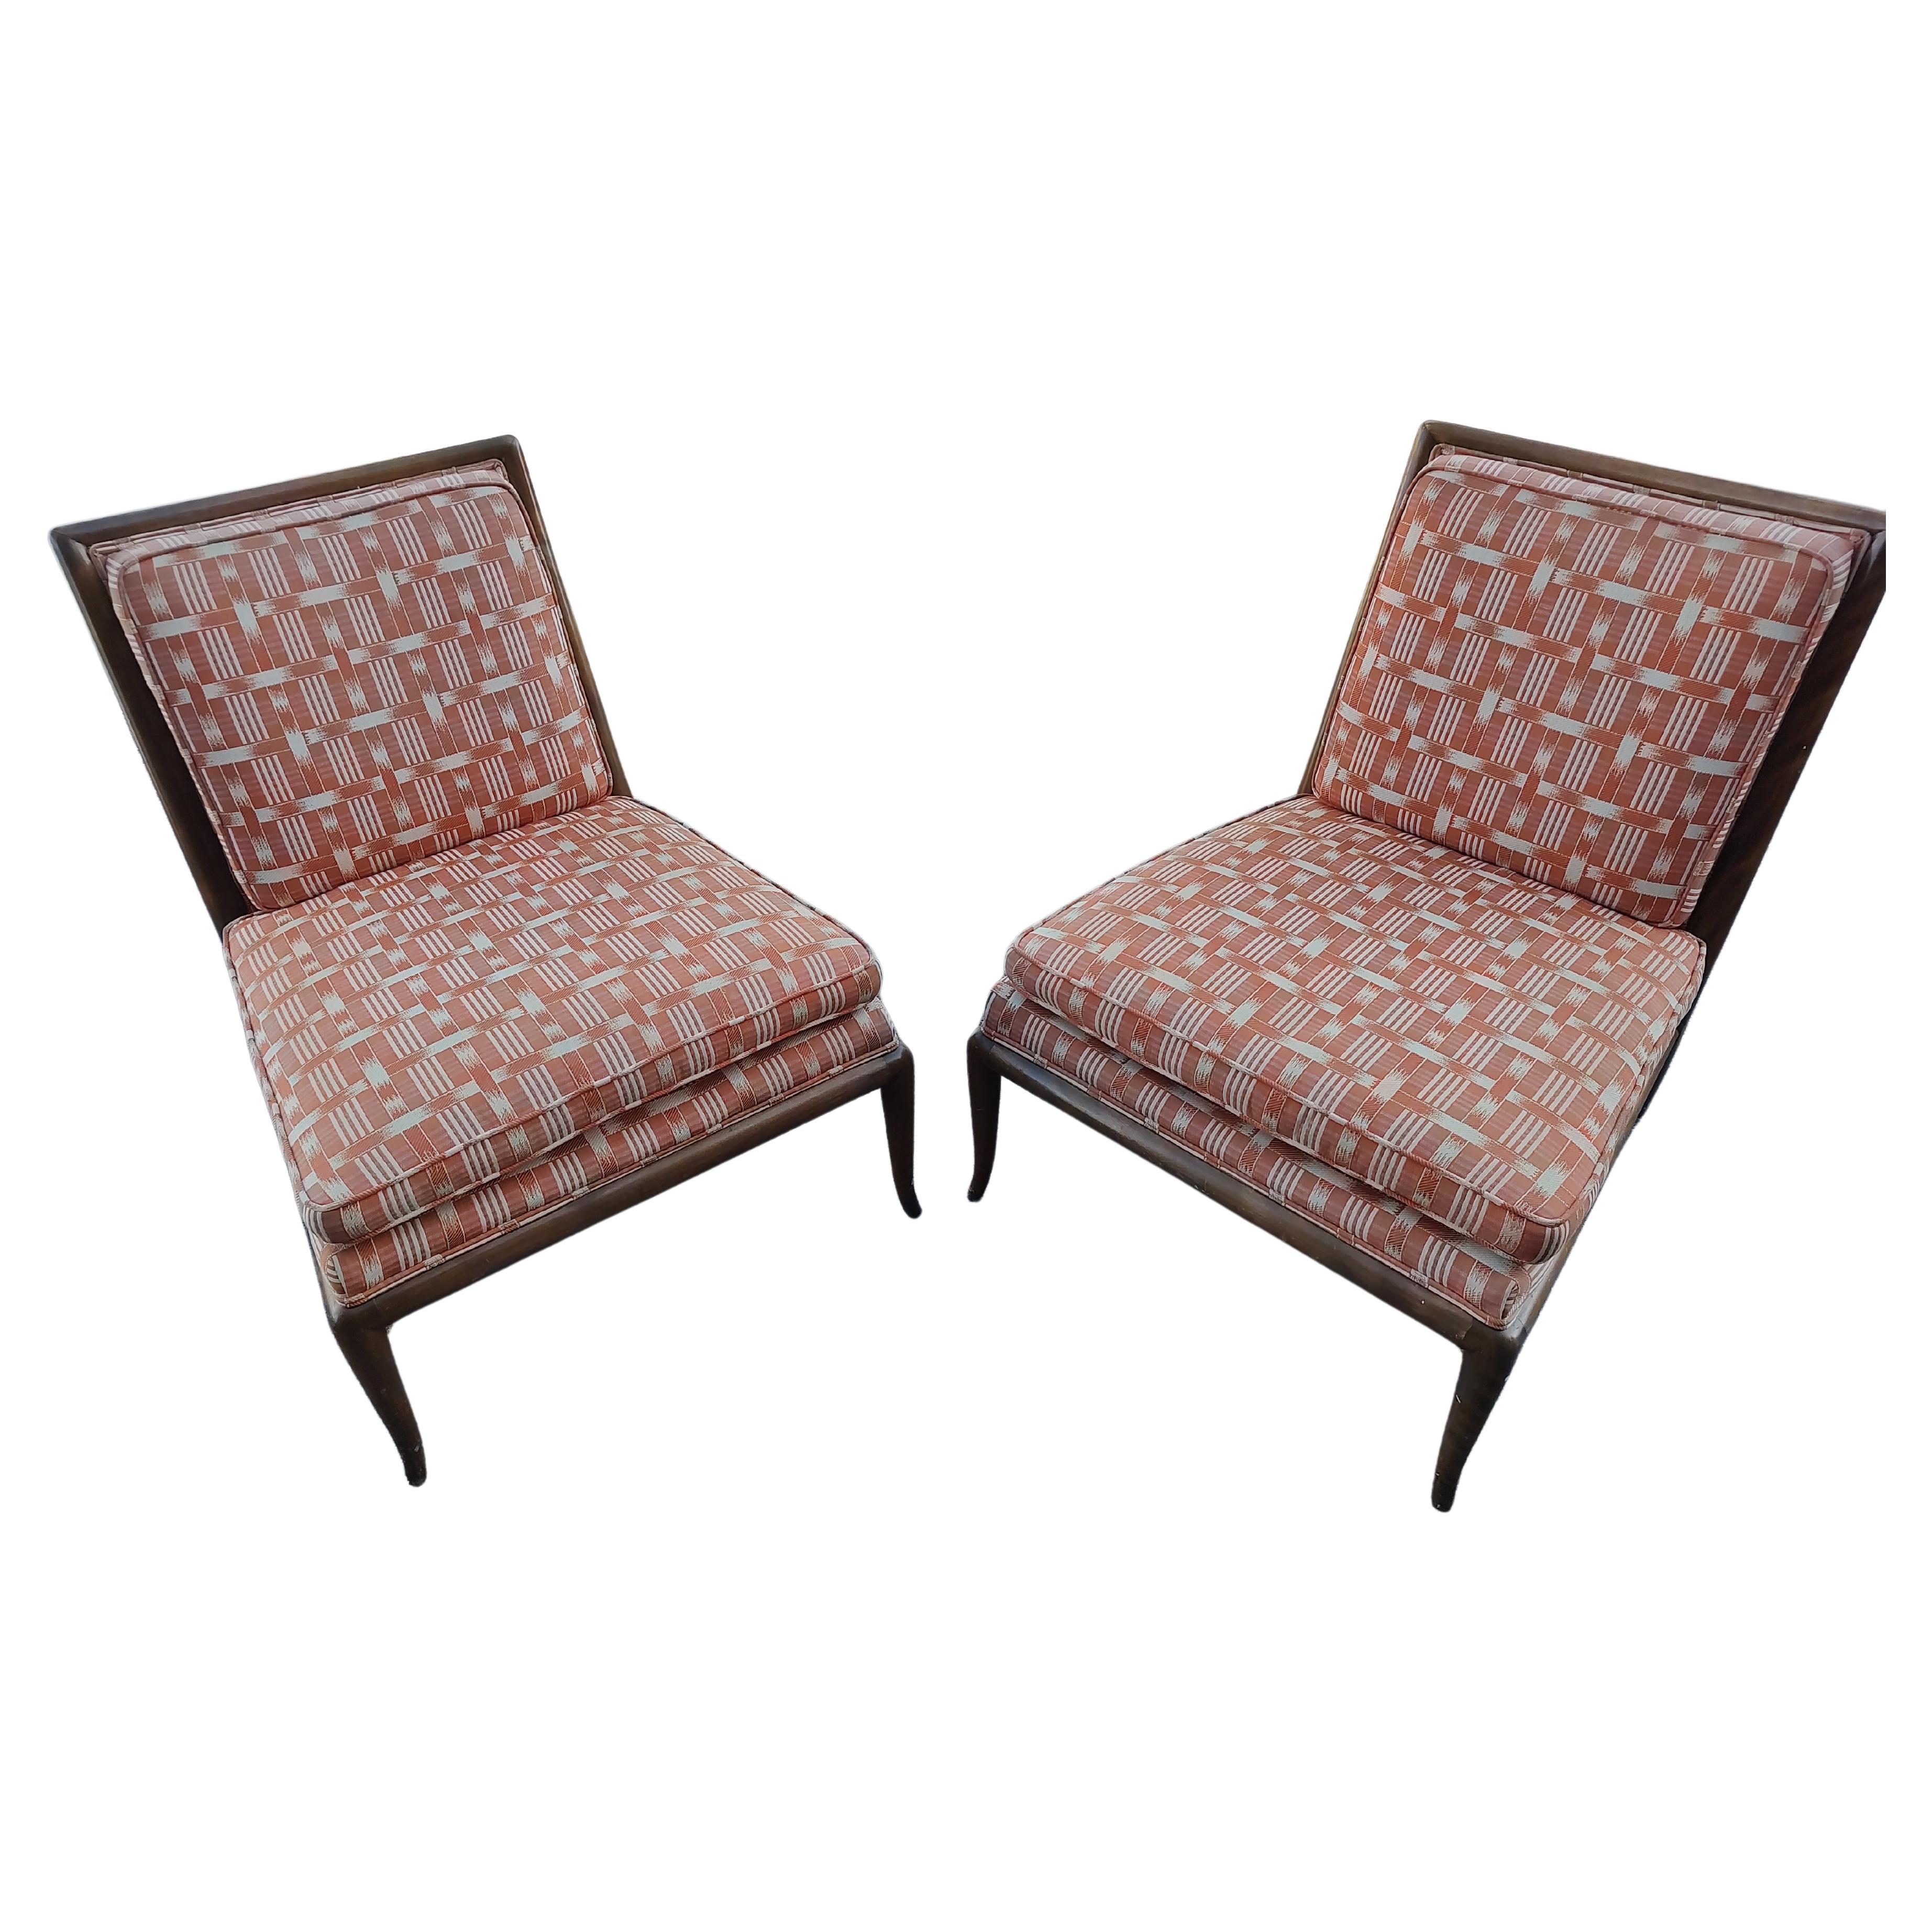 Fabric Pair of Mid Century Modern Walnut Lounge Chairs By Robs johns Gibbons  For Sale